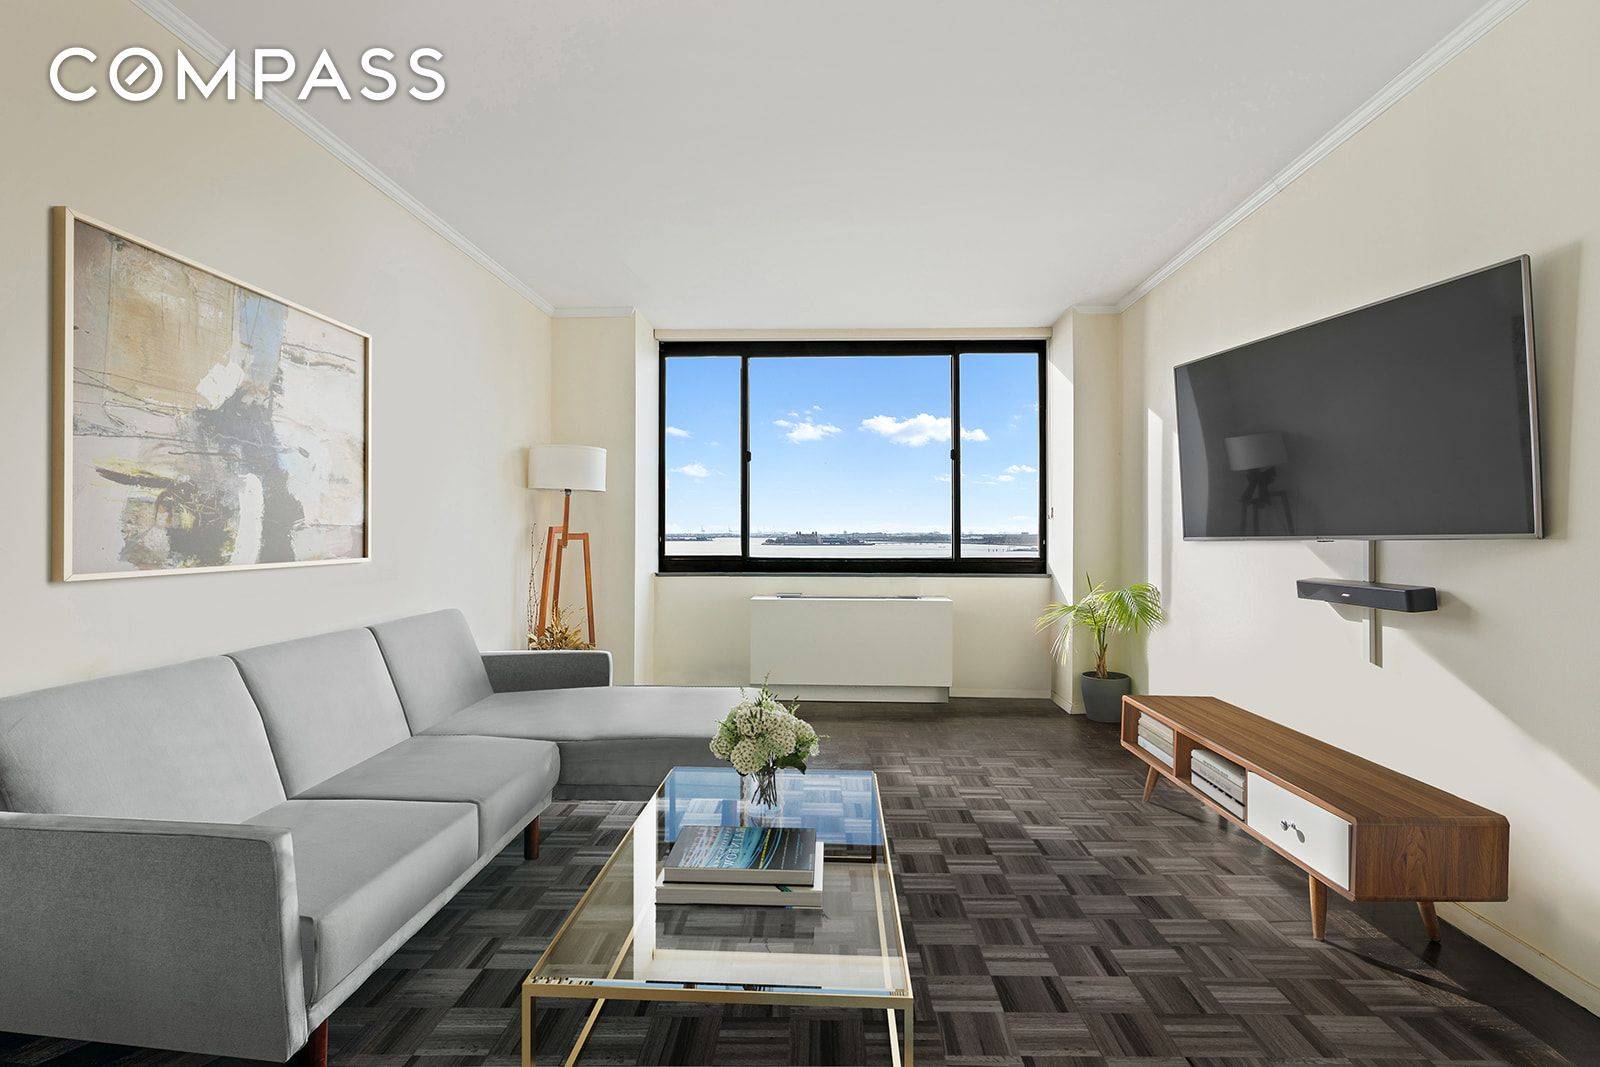 Mesmerizing Hudson River amp ; Statue of Liberty views abound from this well proportioned one bedroom at Liberty House.